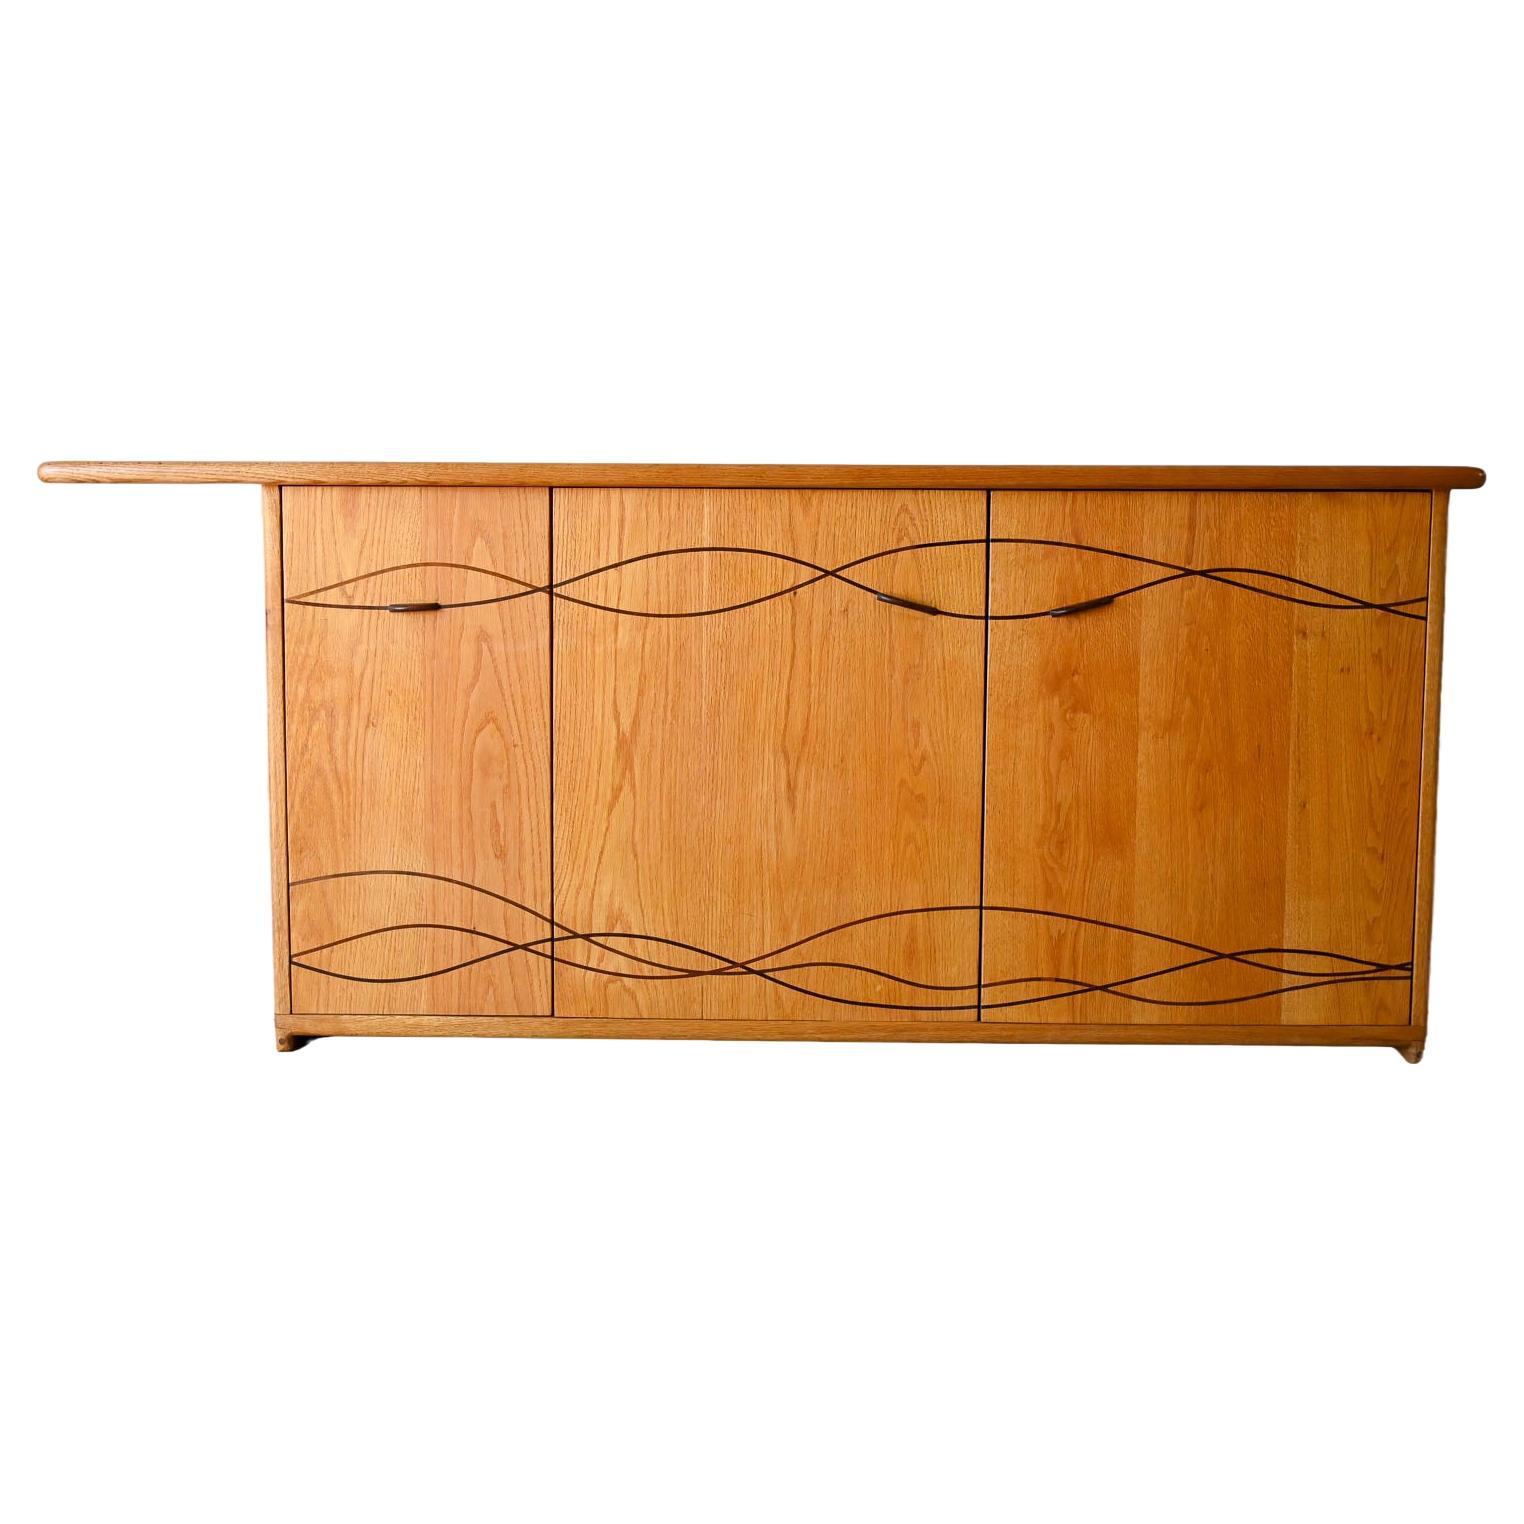 Bespoke Cabinet with Carved Inlay by Robert Squire Bierbaum, 1995 For Sale